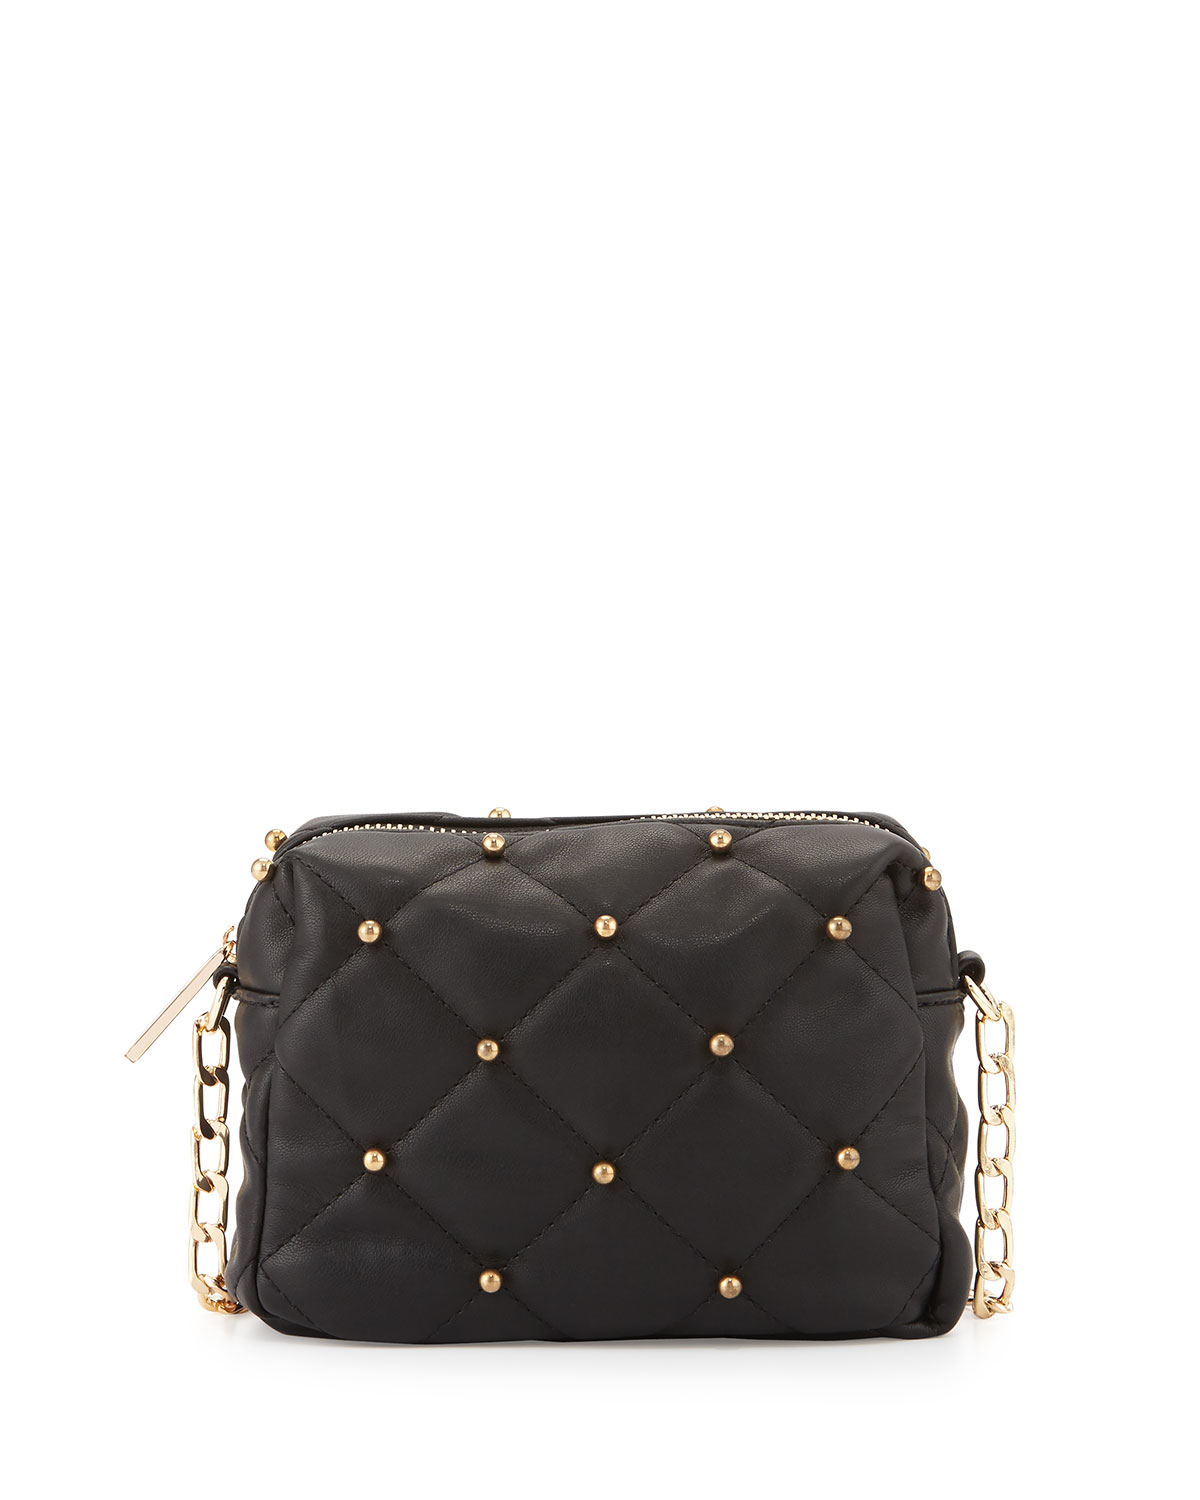 Neiman Marcus Beaded Quilted Mini Crossbody Bag in Black - Lyst